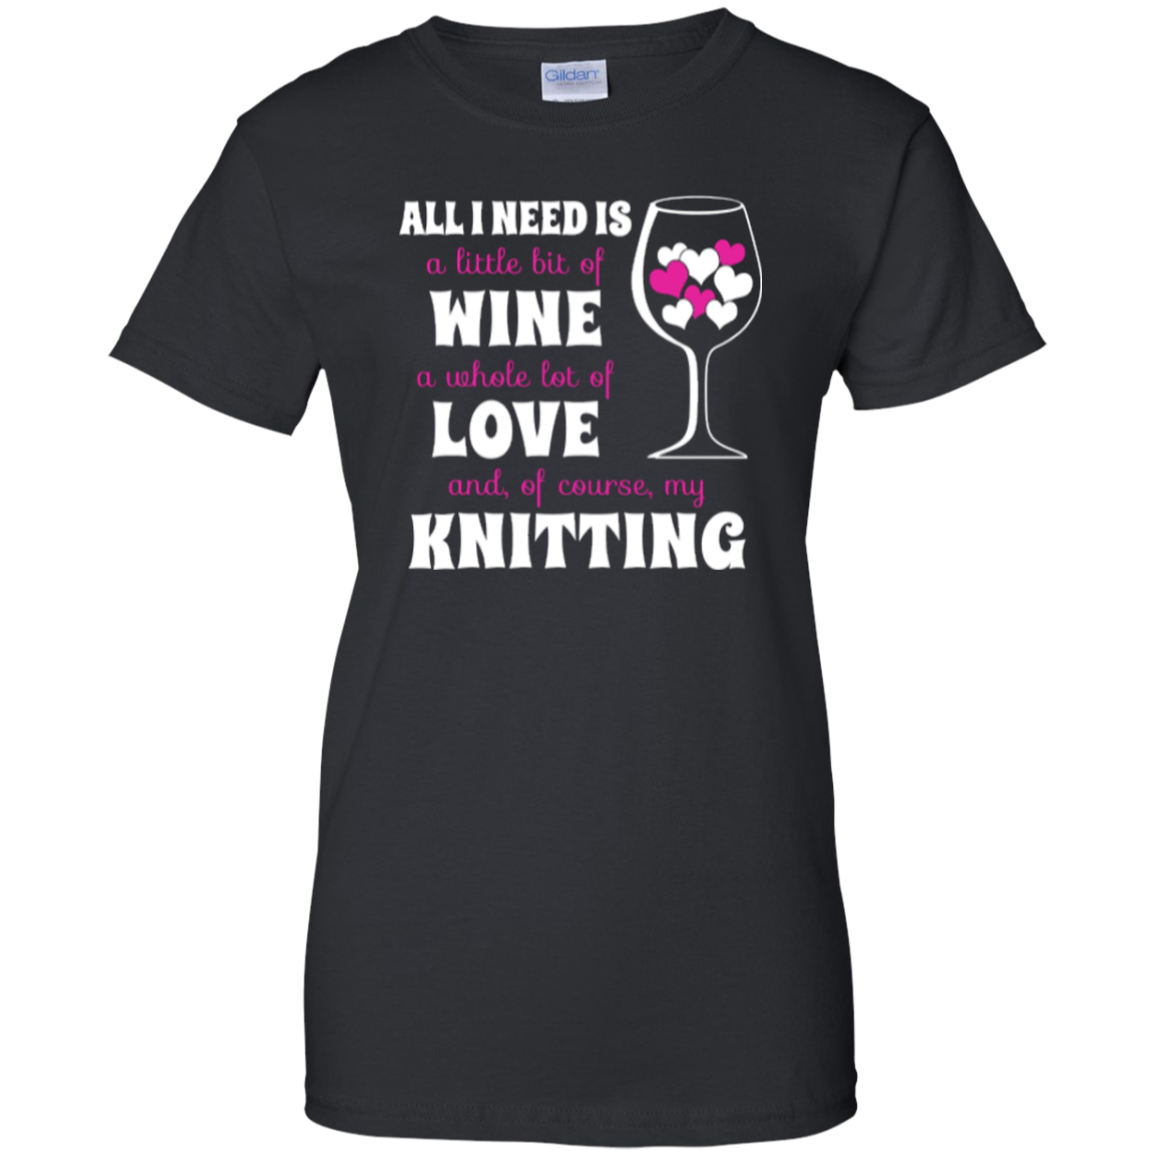 All I Need is Wine-Love-Knitting Ladies Custom 100% Cotton T-Shirt - Crafter4Life - 2